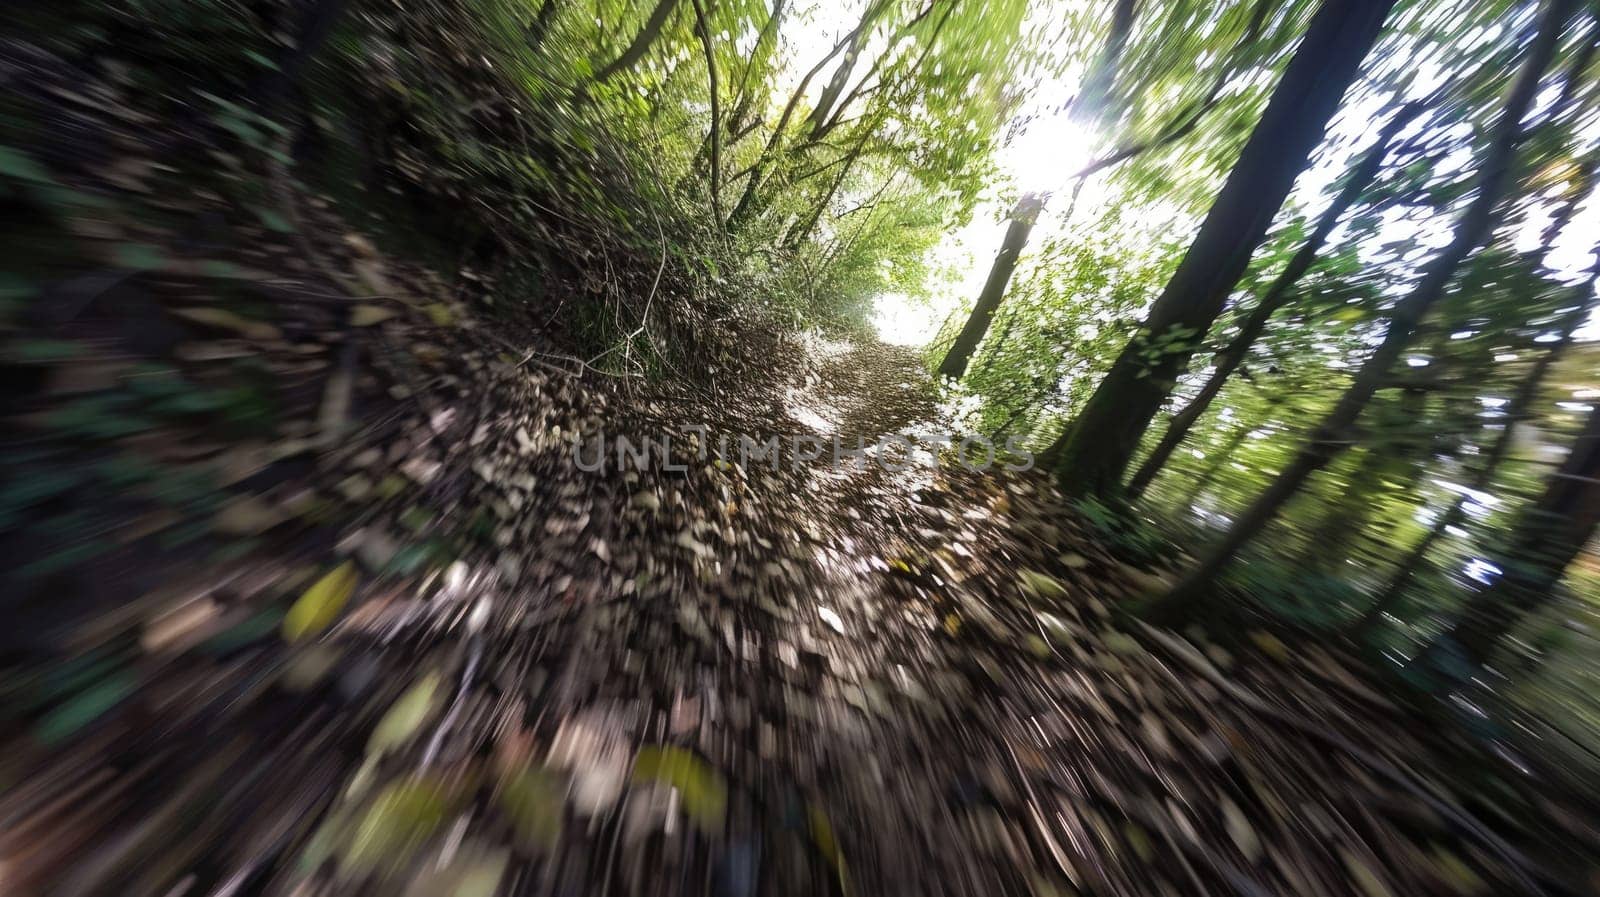 Descent from the hill on bicycle. First person view. Mountain bike ride by natali_brill